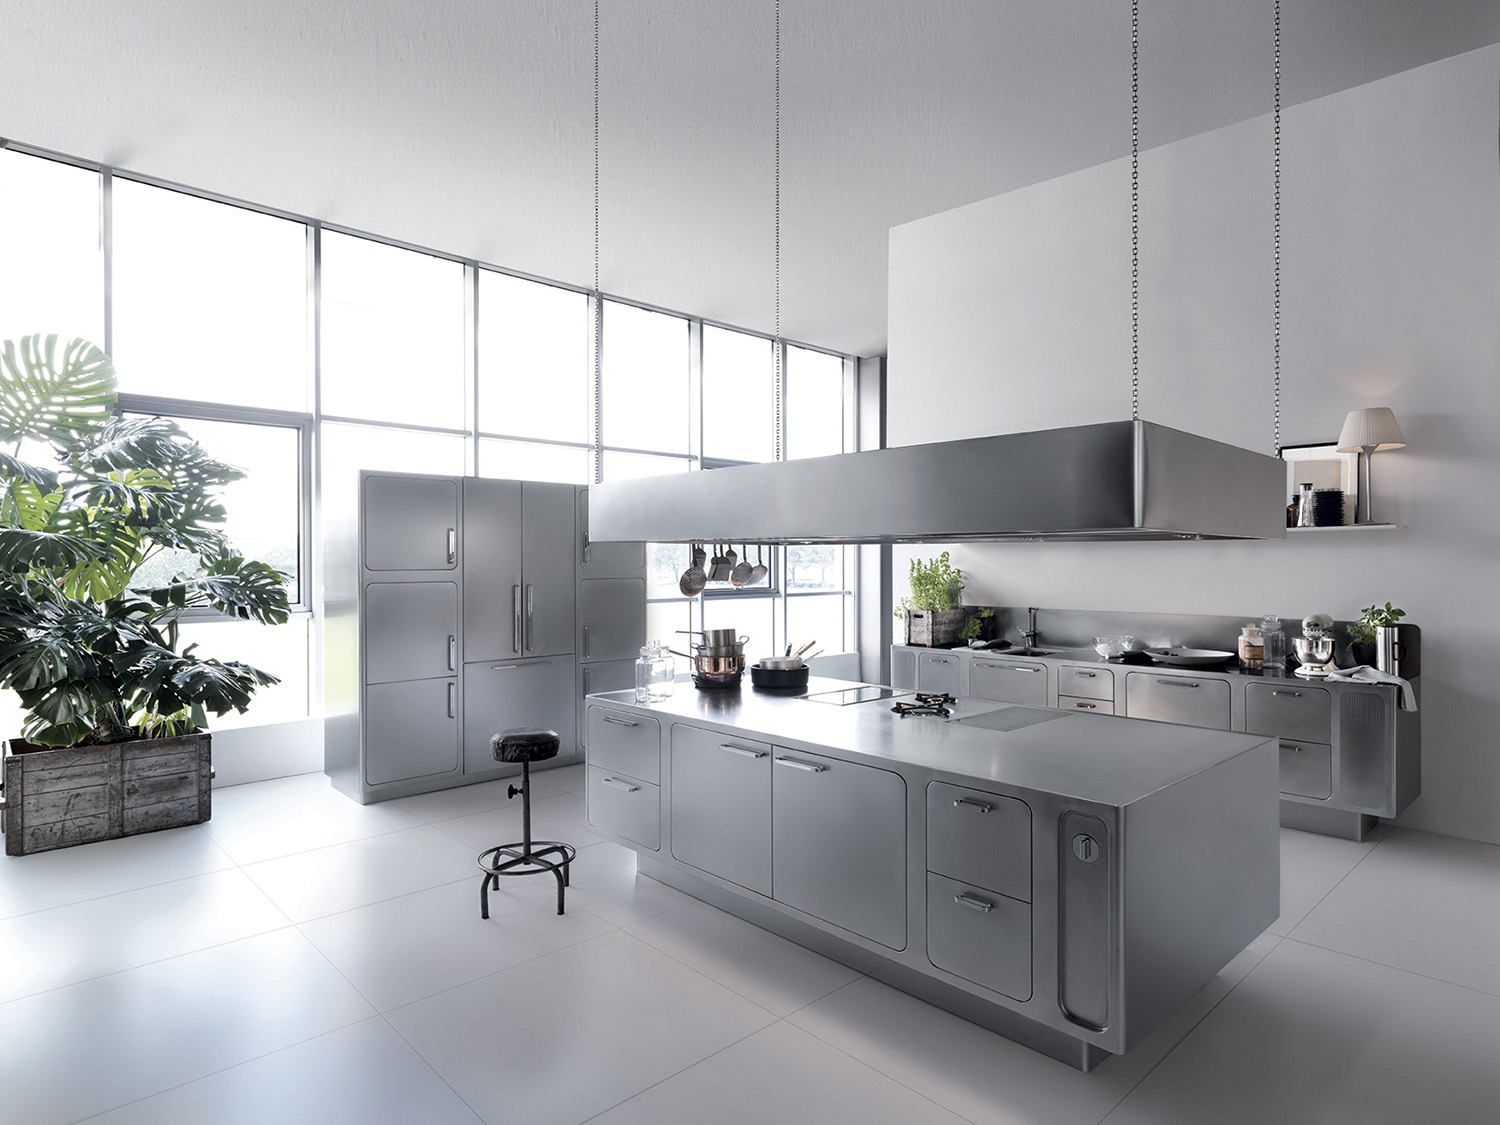 8 Reasons To Choose A Stainless Steel Kitchen Abimis